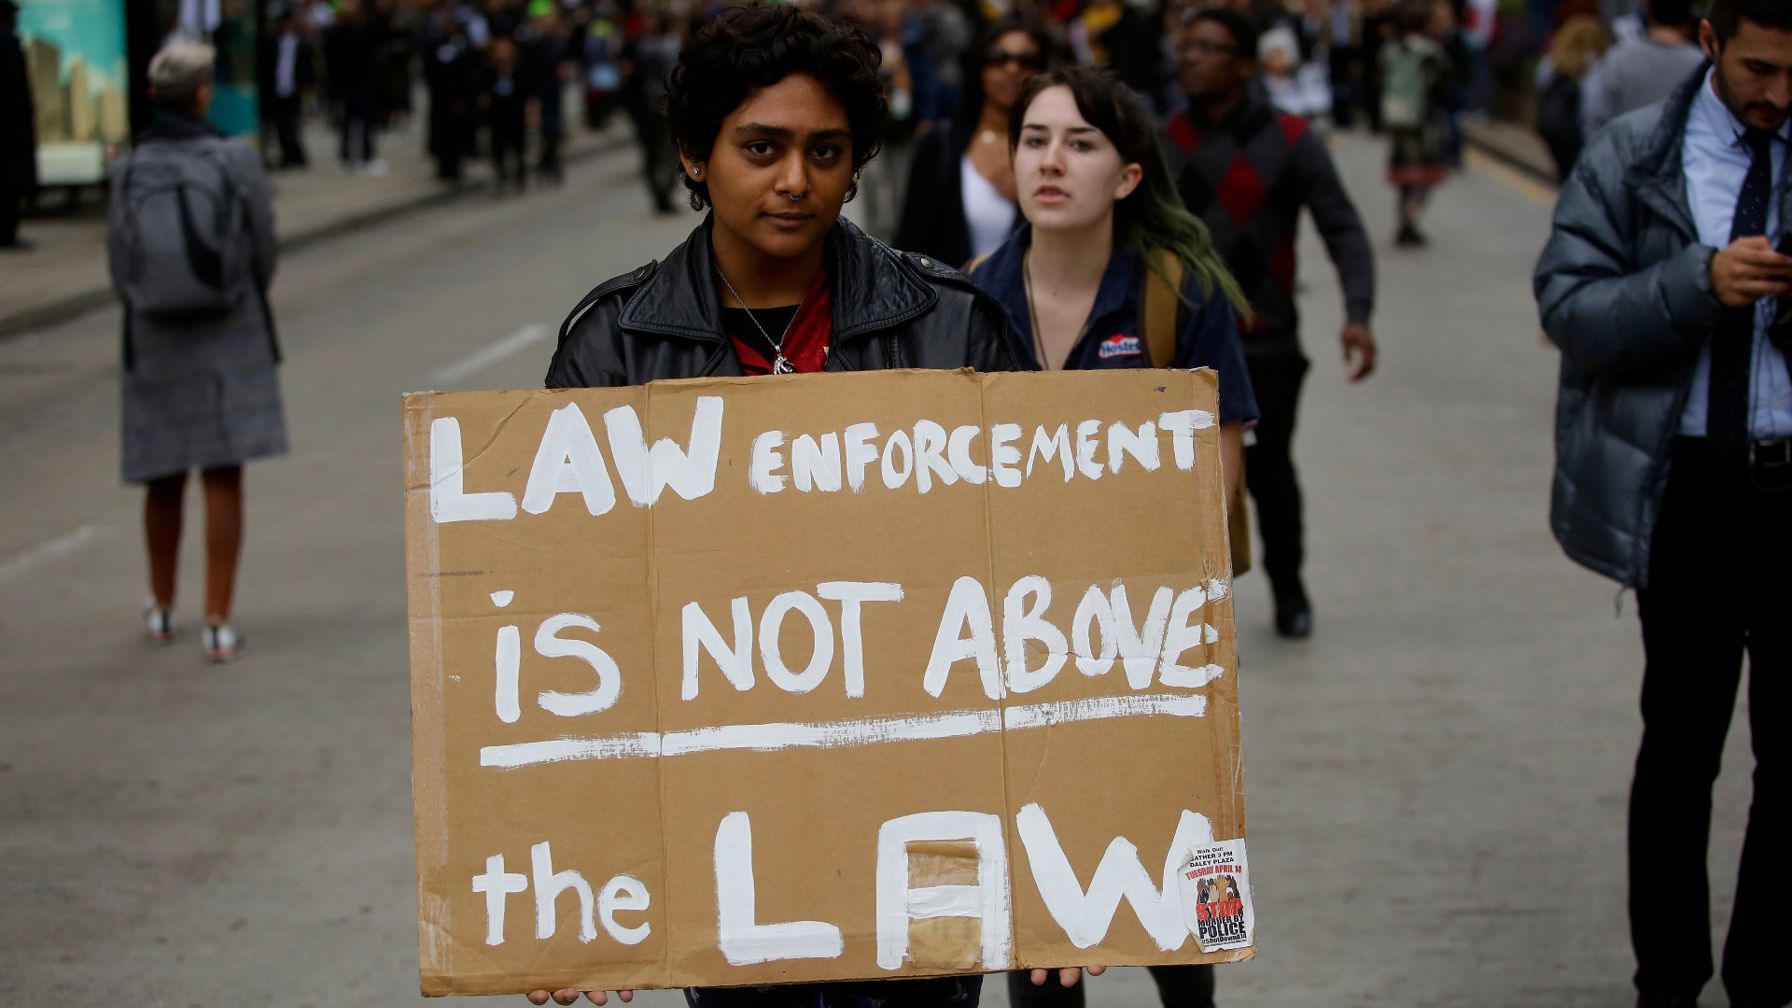 Demonstrator holding a sign reading "Law enforcement is not above the law"